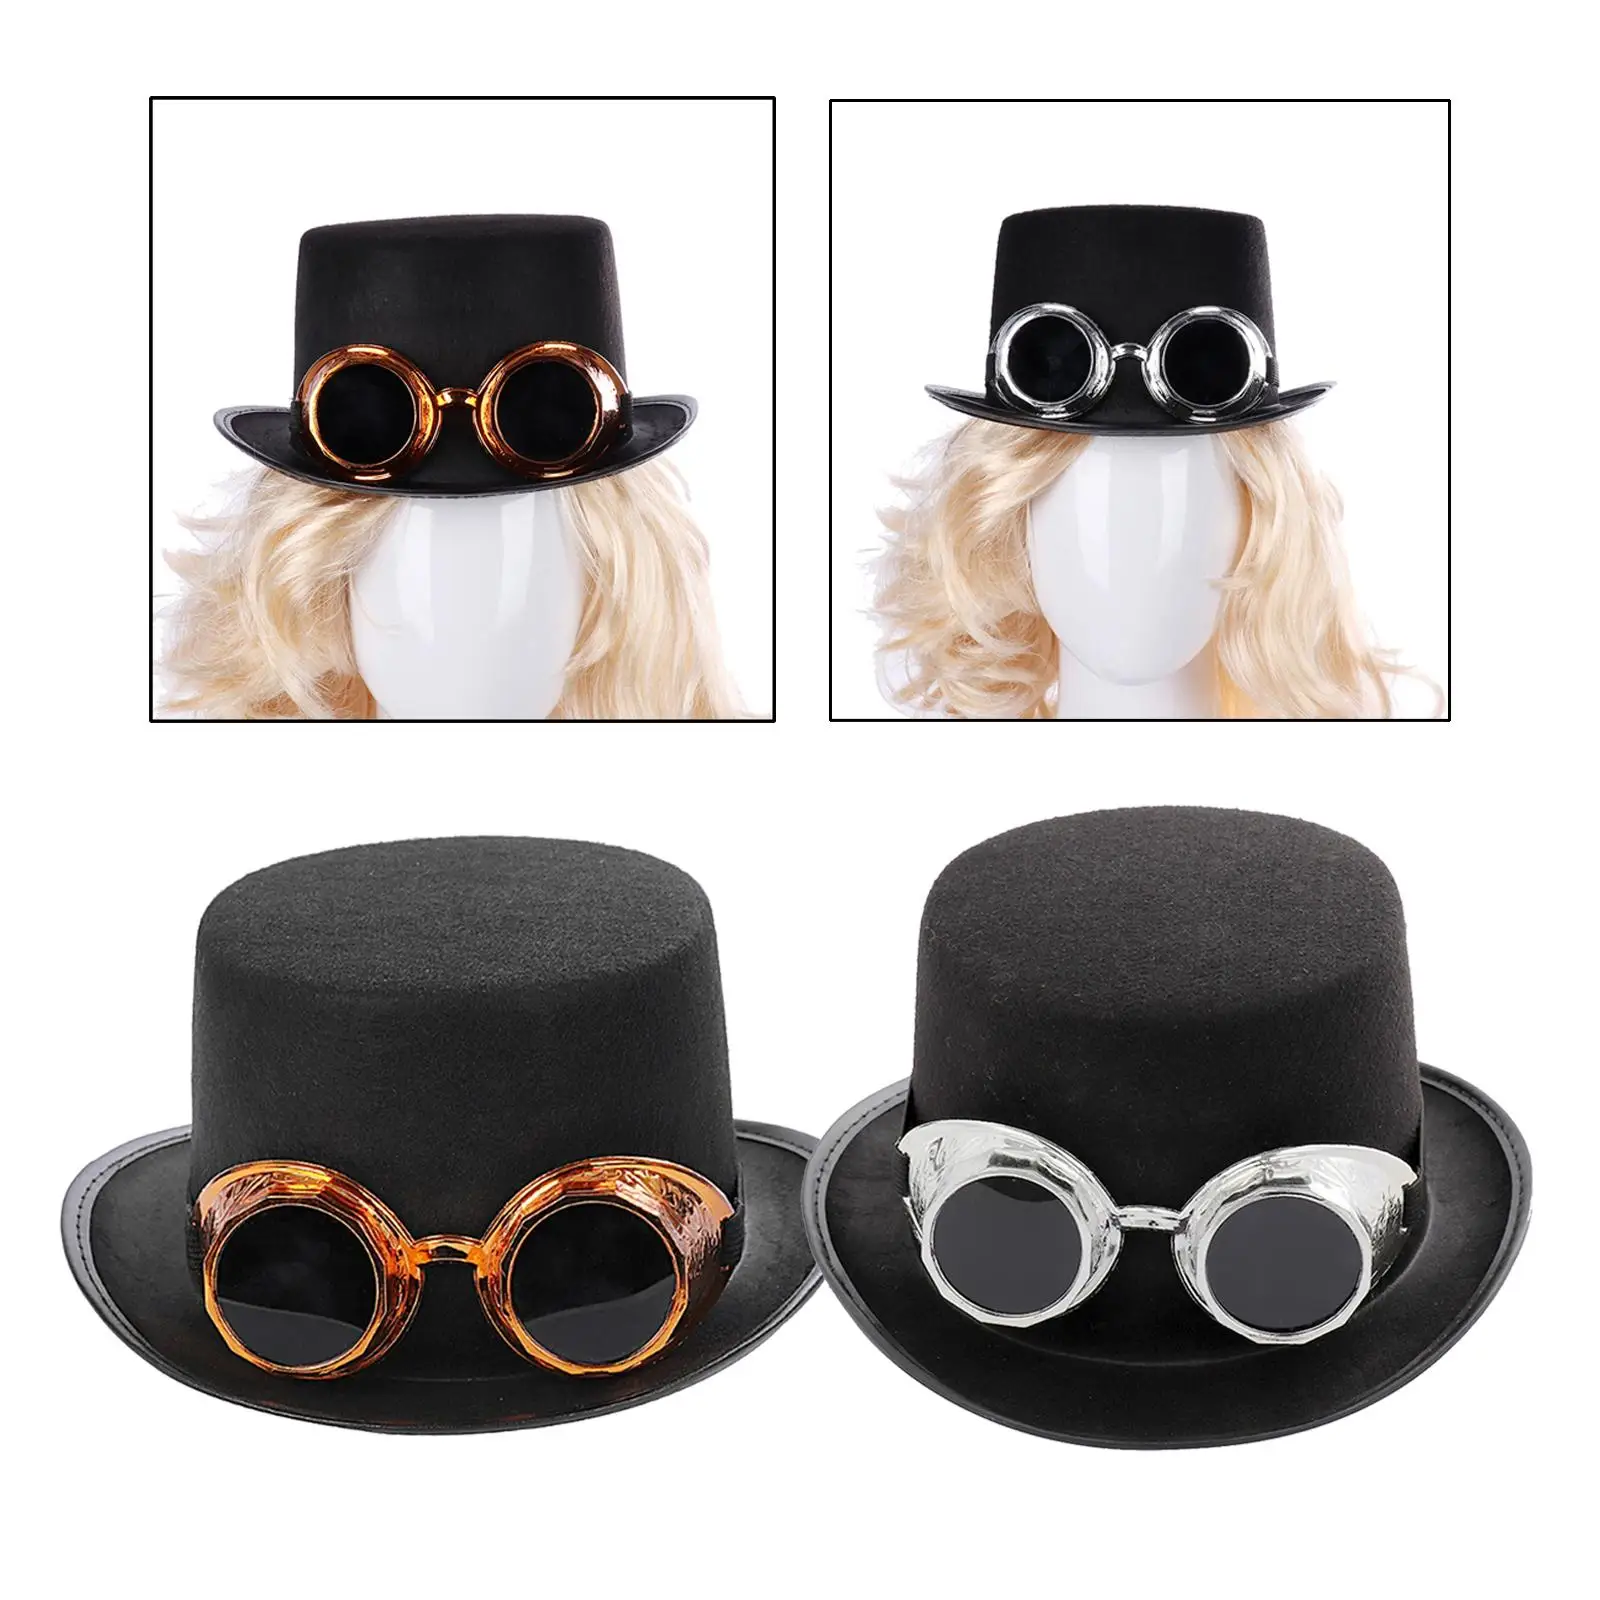 Goth Steampunk Top Hat with Goggles Cosplay Costume Hat Head Wear Gift